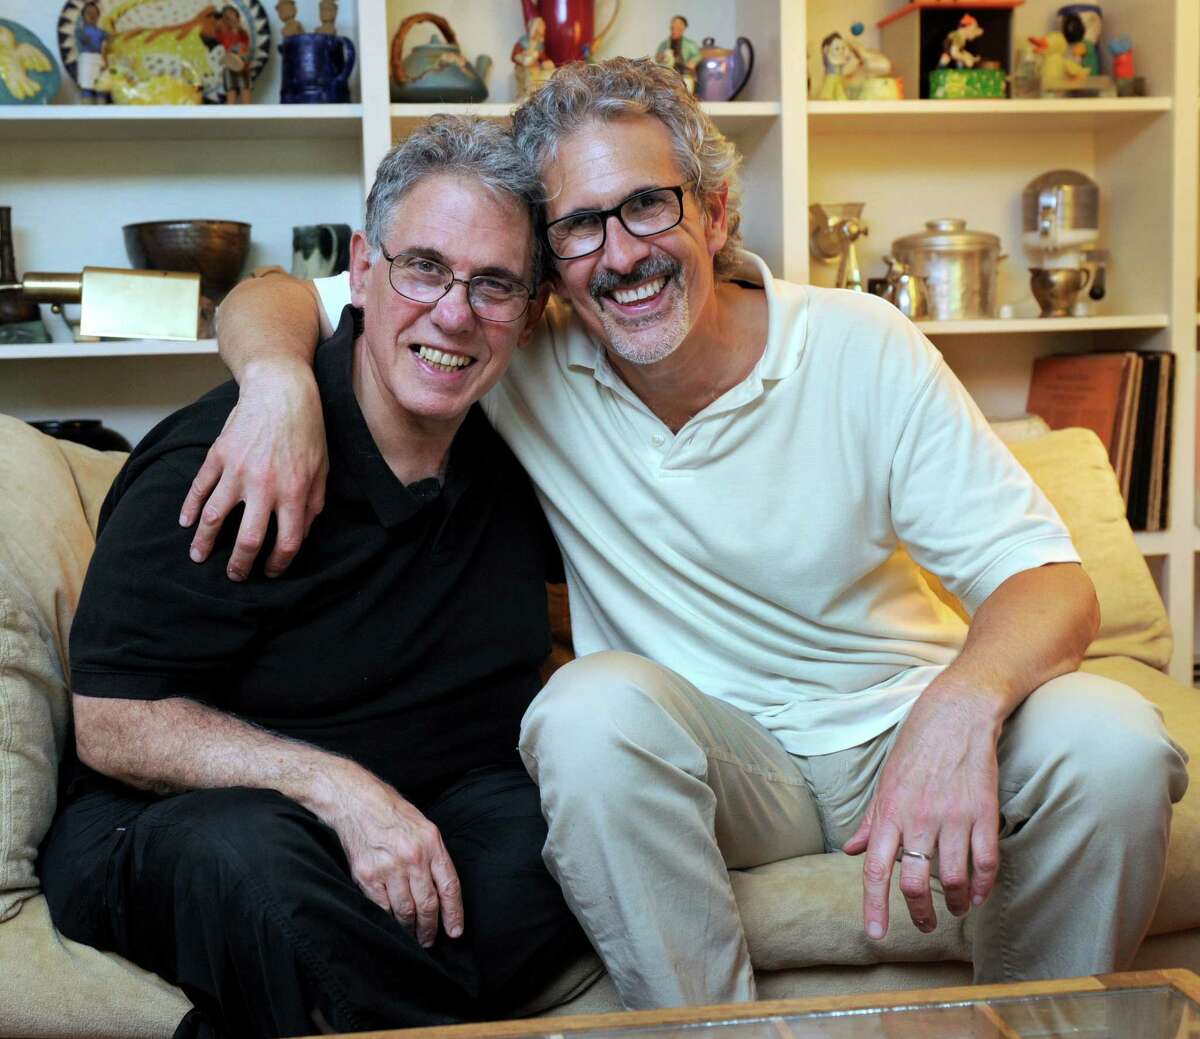 Ken Cornet, 71, left, and Joe Mustich, 59, have been together since 1979. They entered into a Civil Union in 2005 and were legally married in 2008. They are photographed in their Washington, Conn. home Wednesday, June 26, 2013.